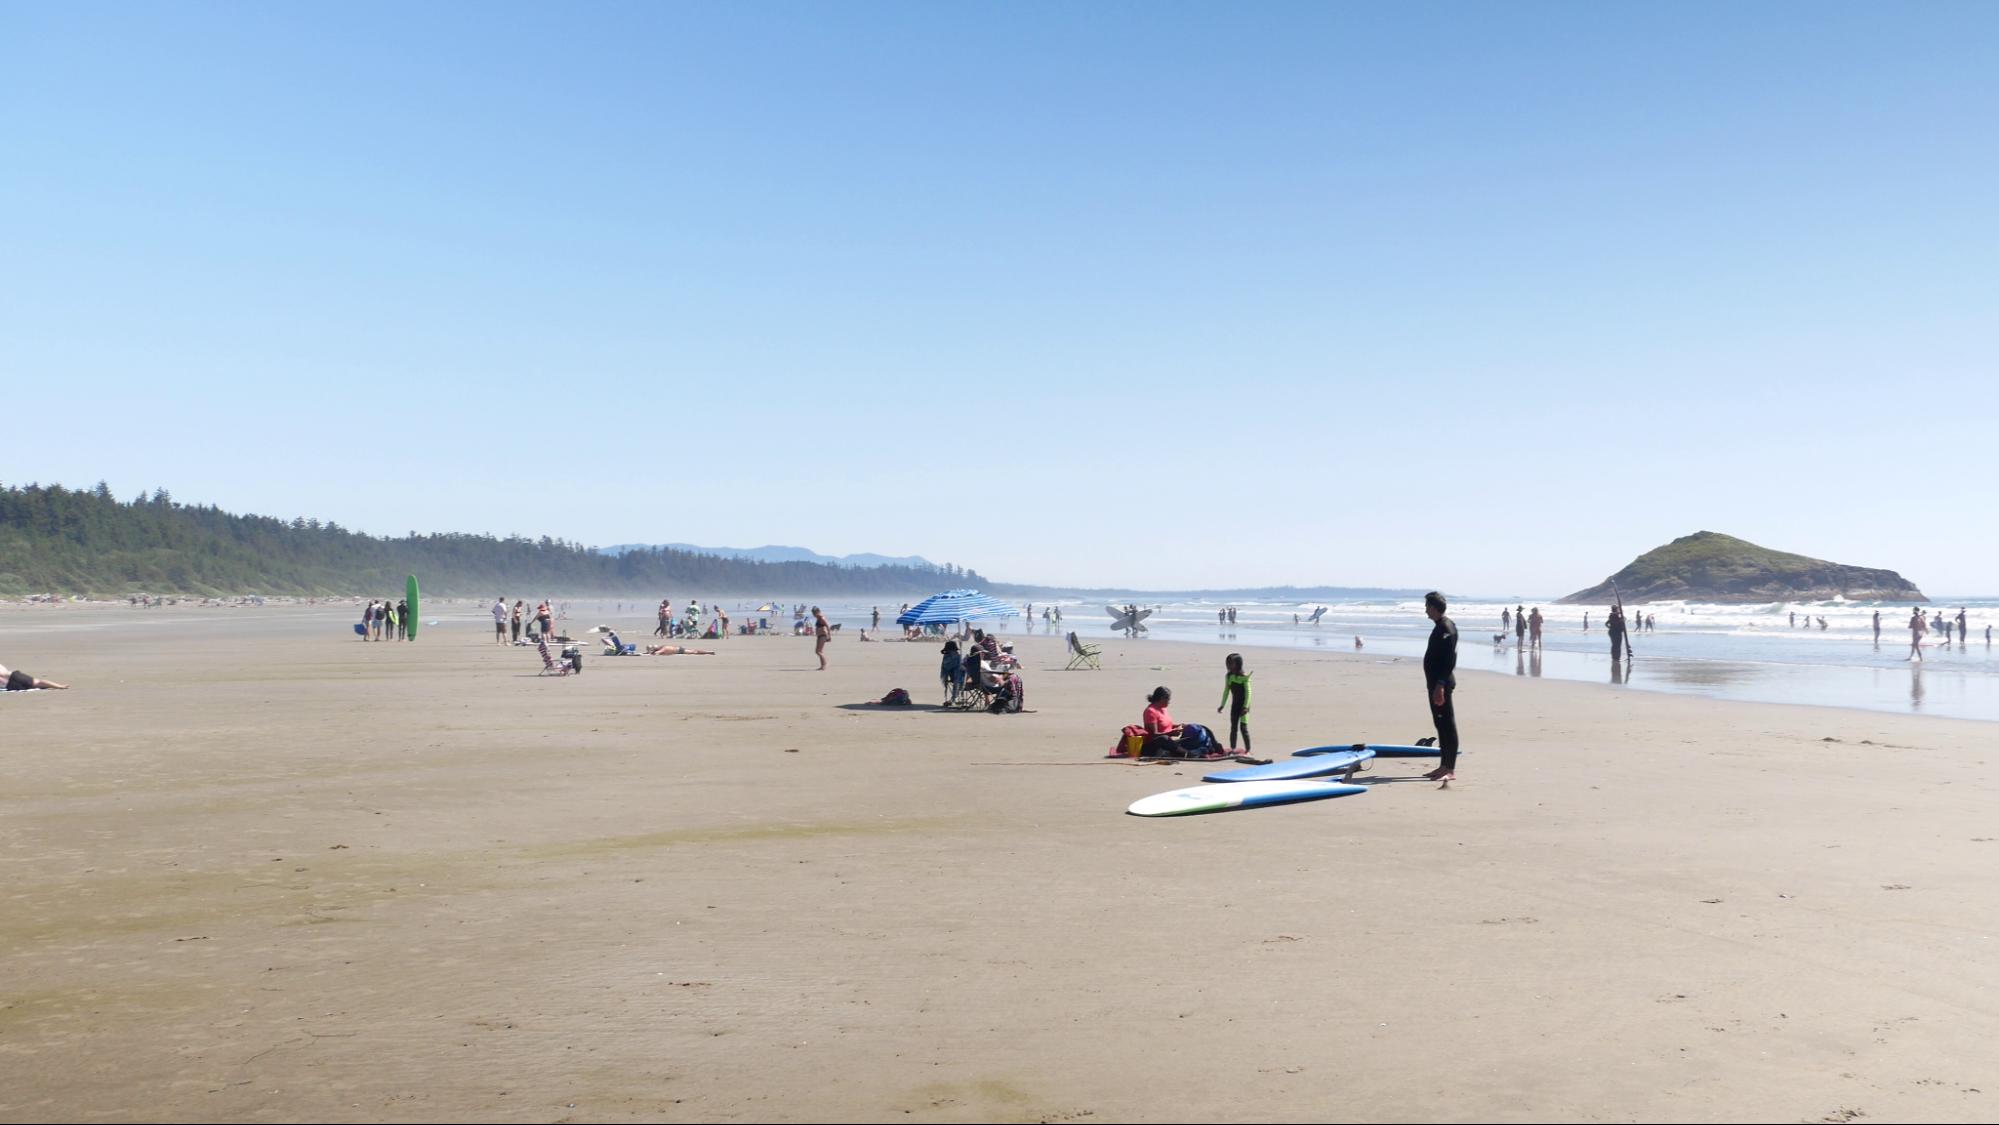 Long beach on a sunny day in Tofino. Lots of people enjoying the water, waves, and sun. 